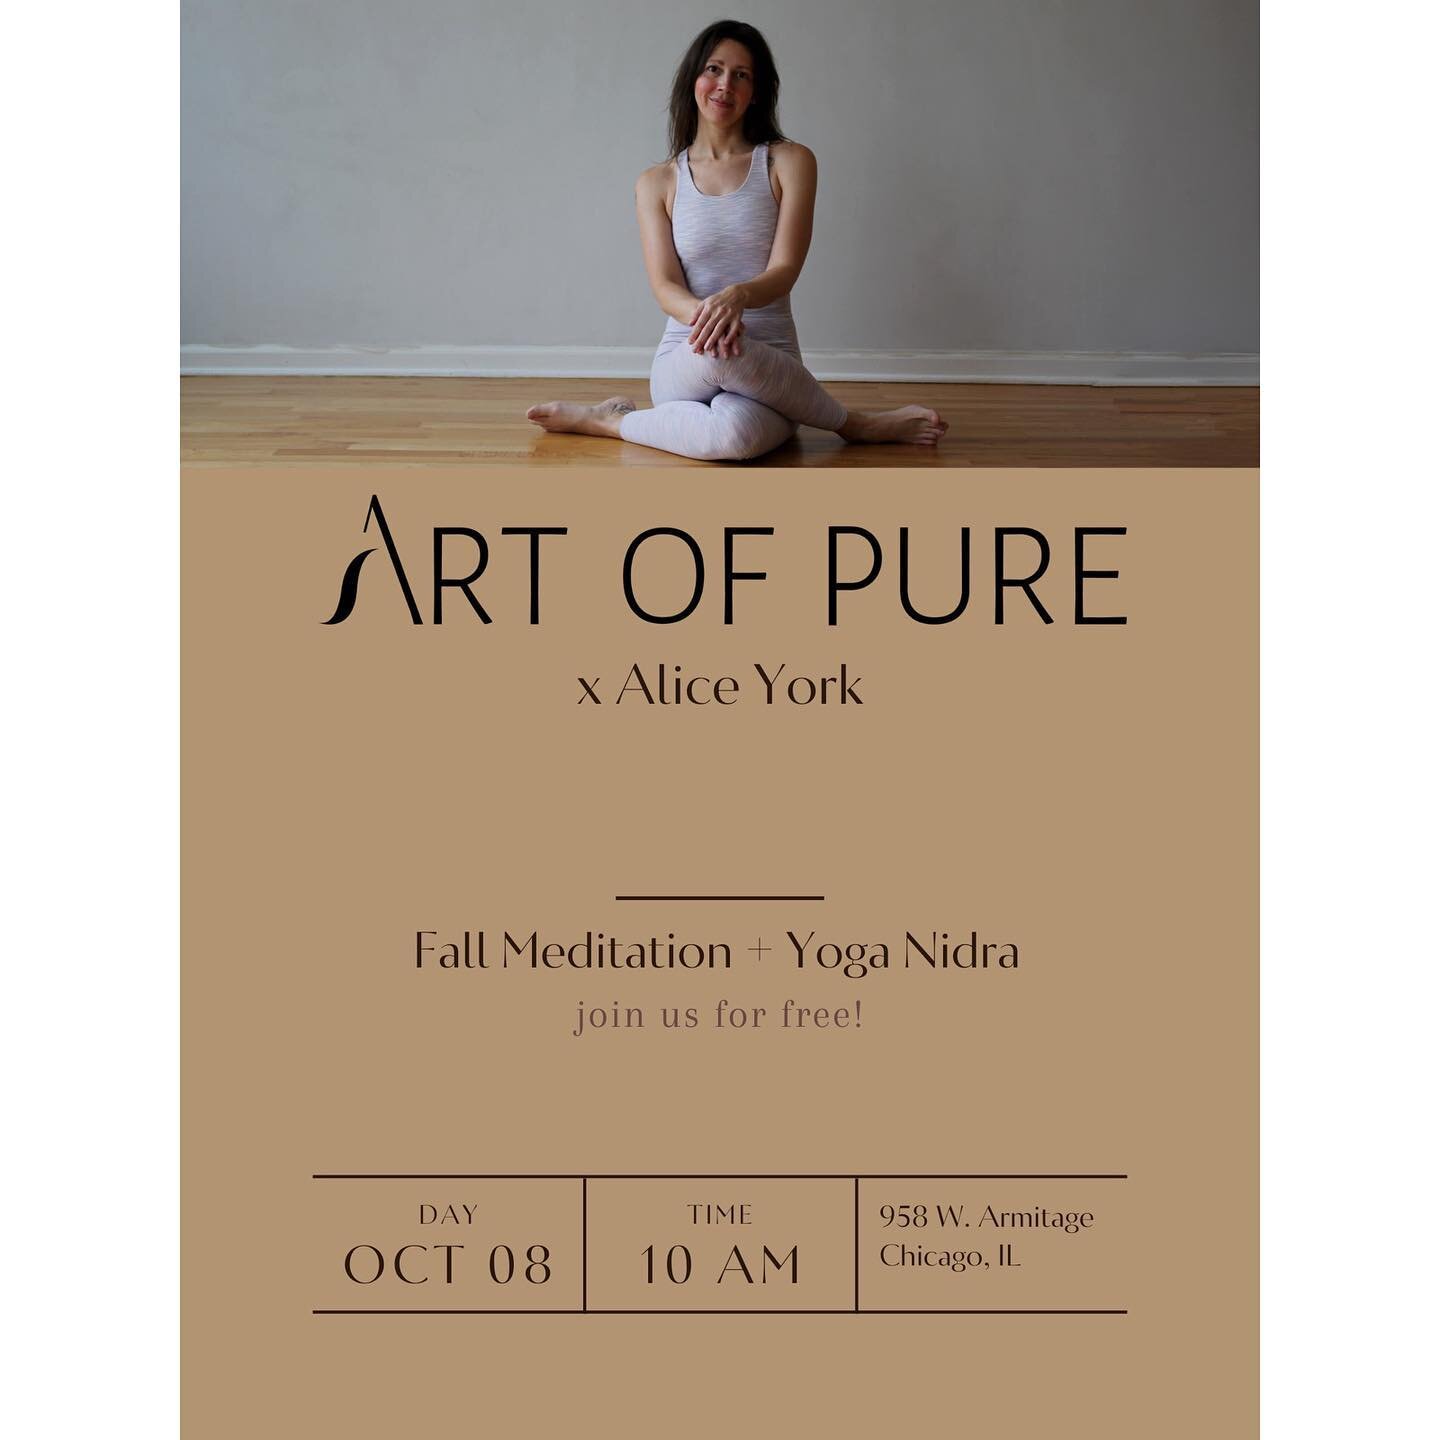 Settle into the new season with a guided meditation led by me this Saturday, October 8 from 10-11 am @artofpure in Chicago. 
⠀⠀⠀⠀⠀⠀
Whether you are new to meditation or an experienced practitioner (or somewhere in between), we welcome you to join us 